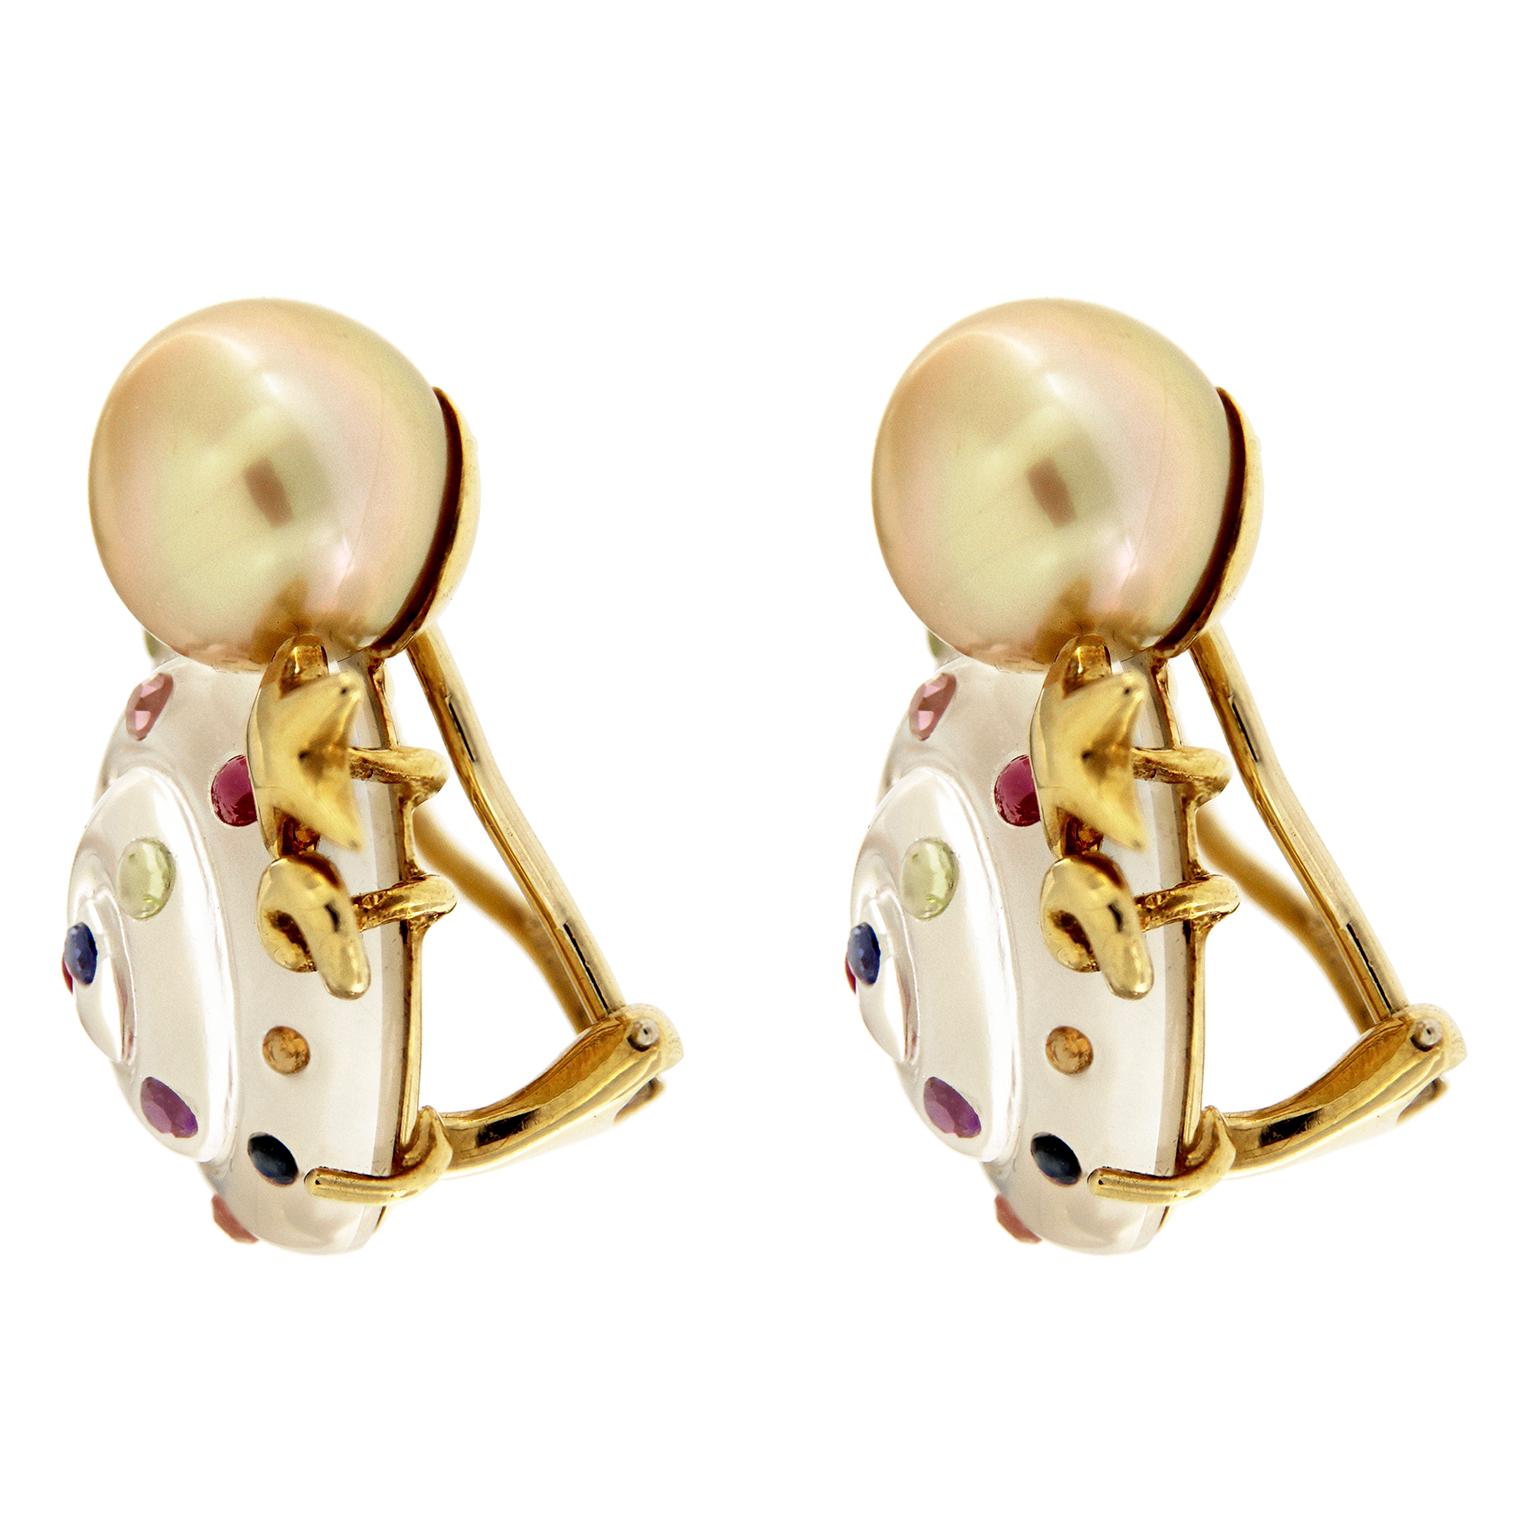 Valentin Magro Carved Crystal Pearl Colored Gemstone Snail Earrings give the animal a colorful twist. Its shell is carved from crystal quartz. Round colored gemstones are inlaid throughout the crystal. A golden pearl rests at the shell opening,